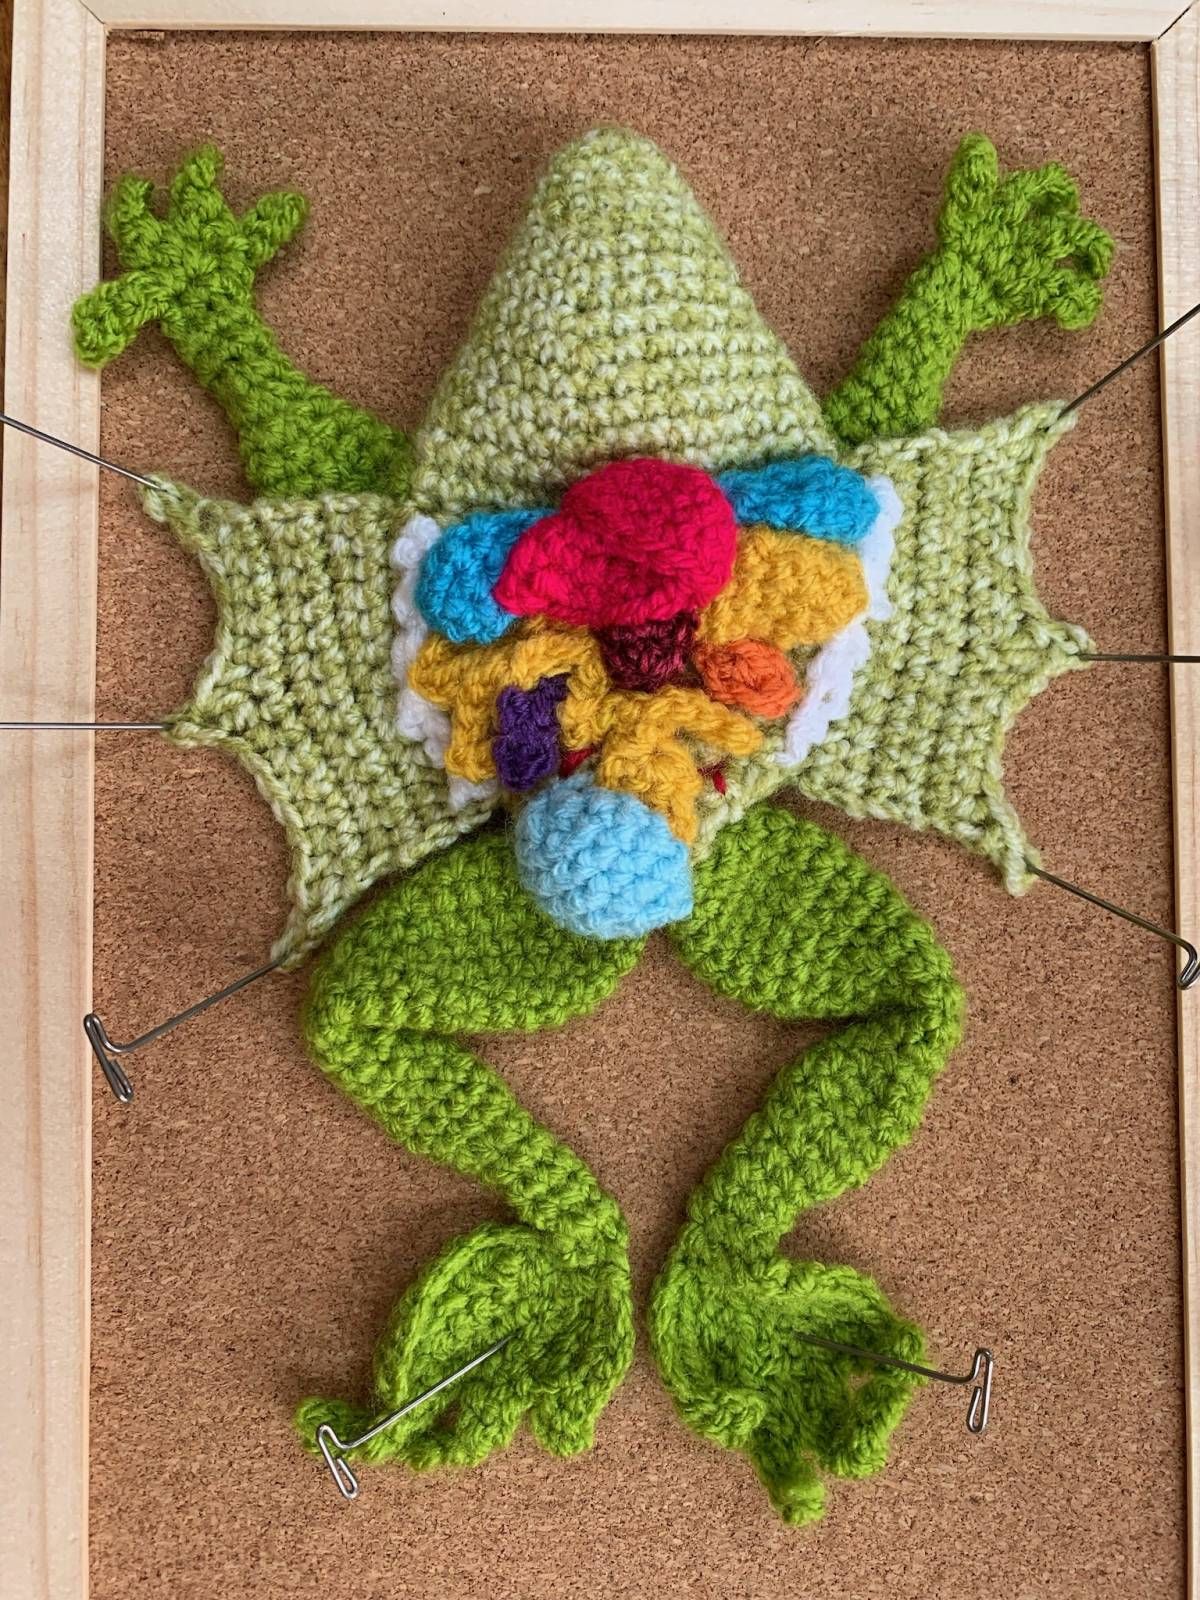 Crochet Dissected Frog Amigurumi Pattern Review by Kate Dell-Smith for Cottontail and Whiskers